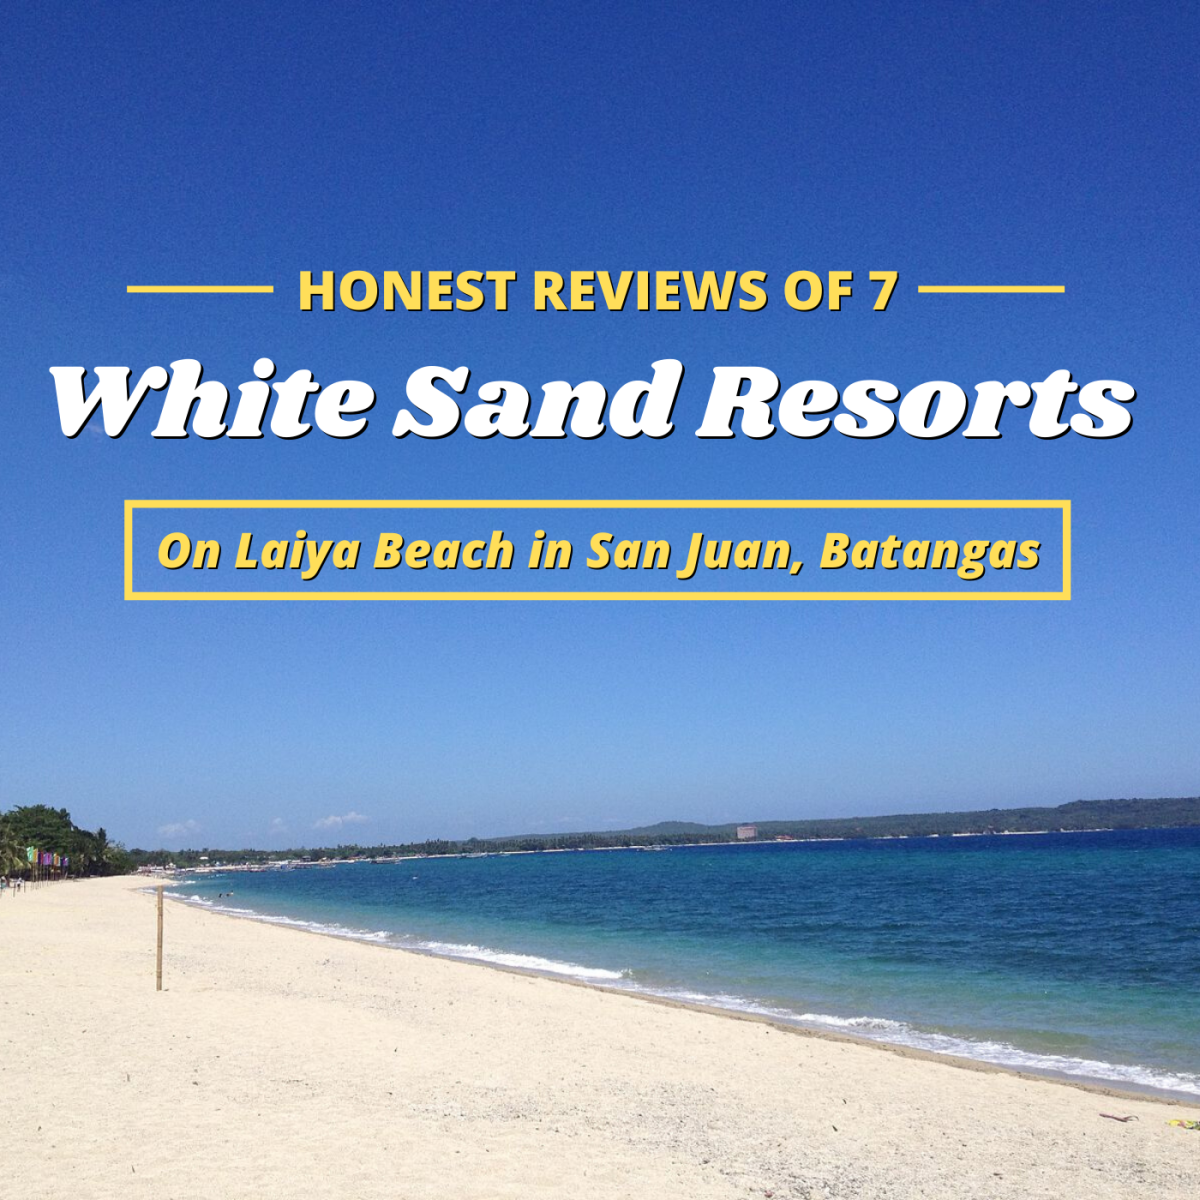 There are many resorts lining the beautiful white sand shoreline of Laiya Beach in San Juan, but not all of them live up to the photos on their websites. 